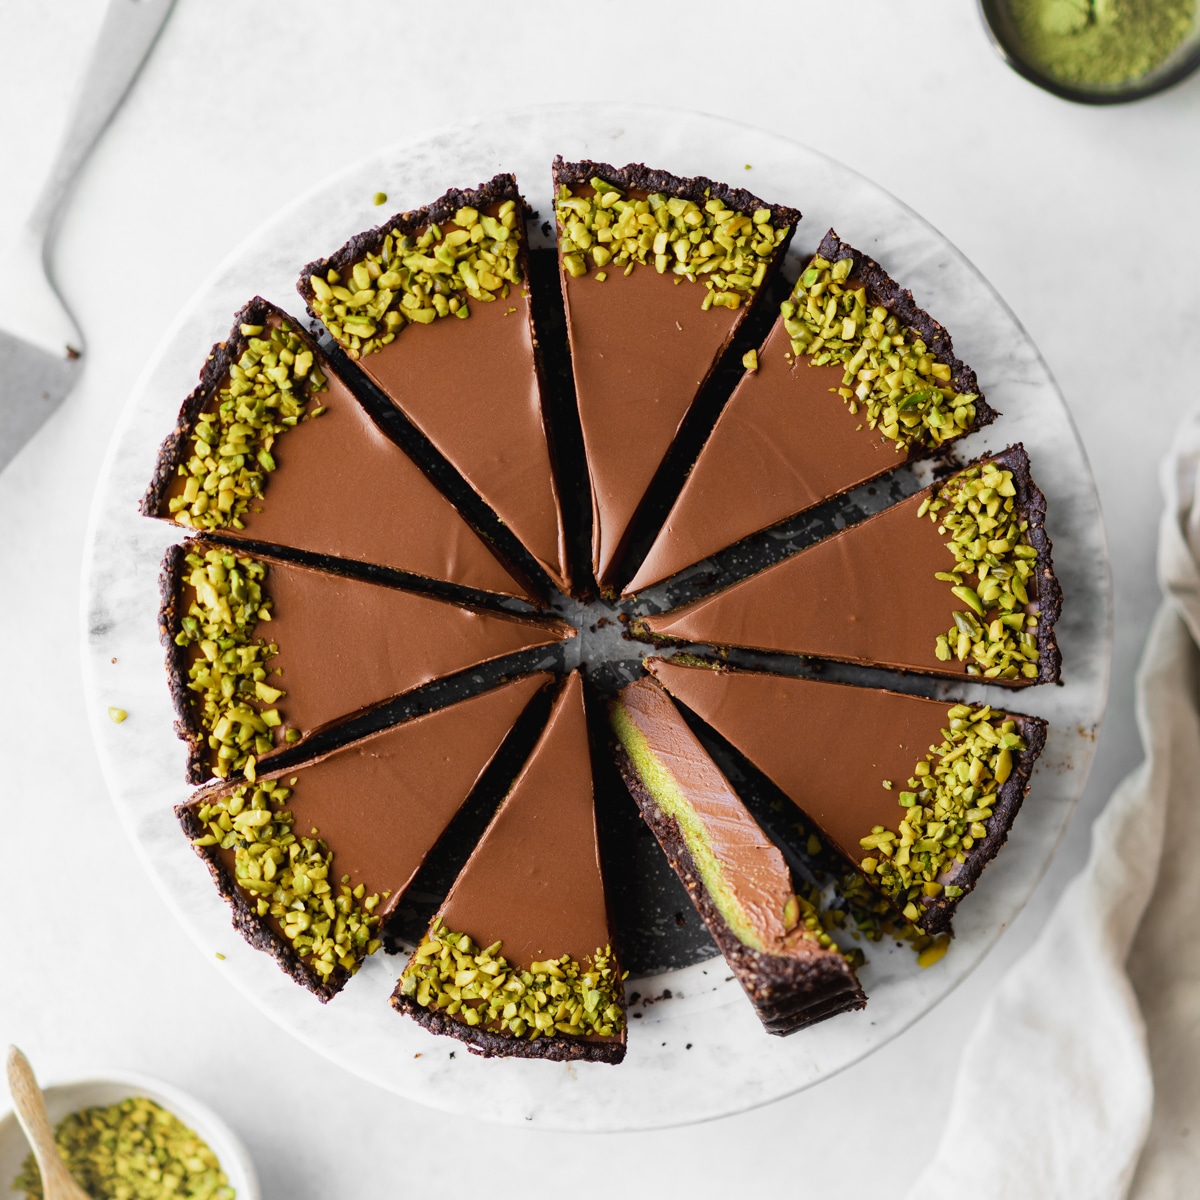 sirup house — Gooey chocolate cake with pistachio butter